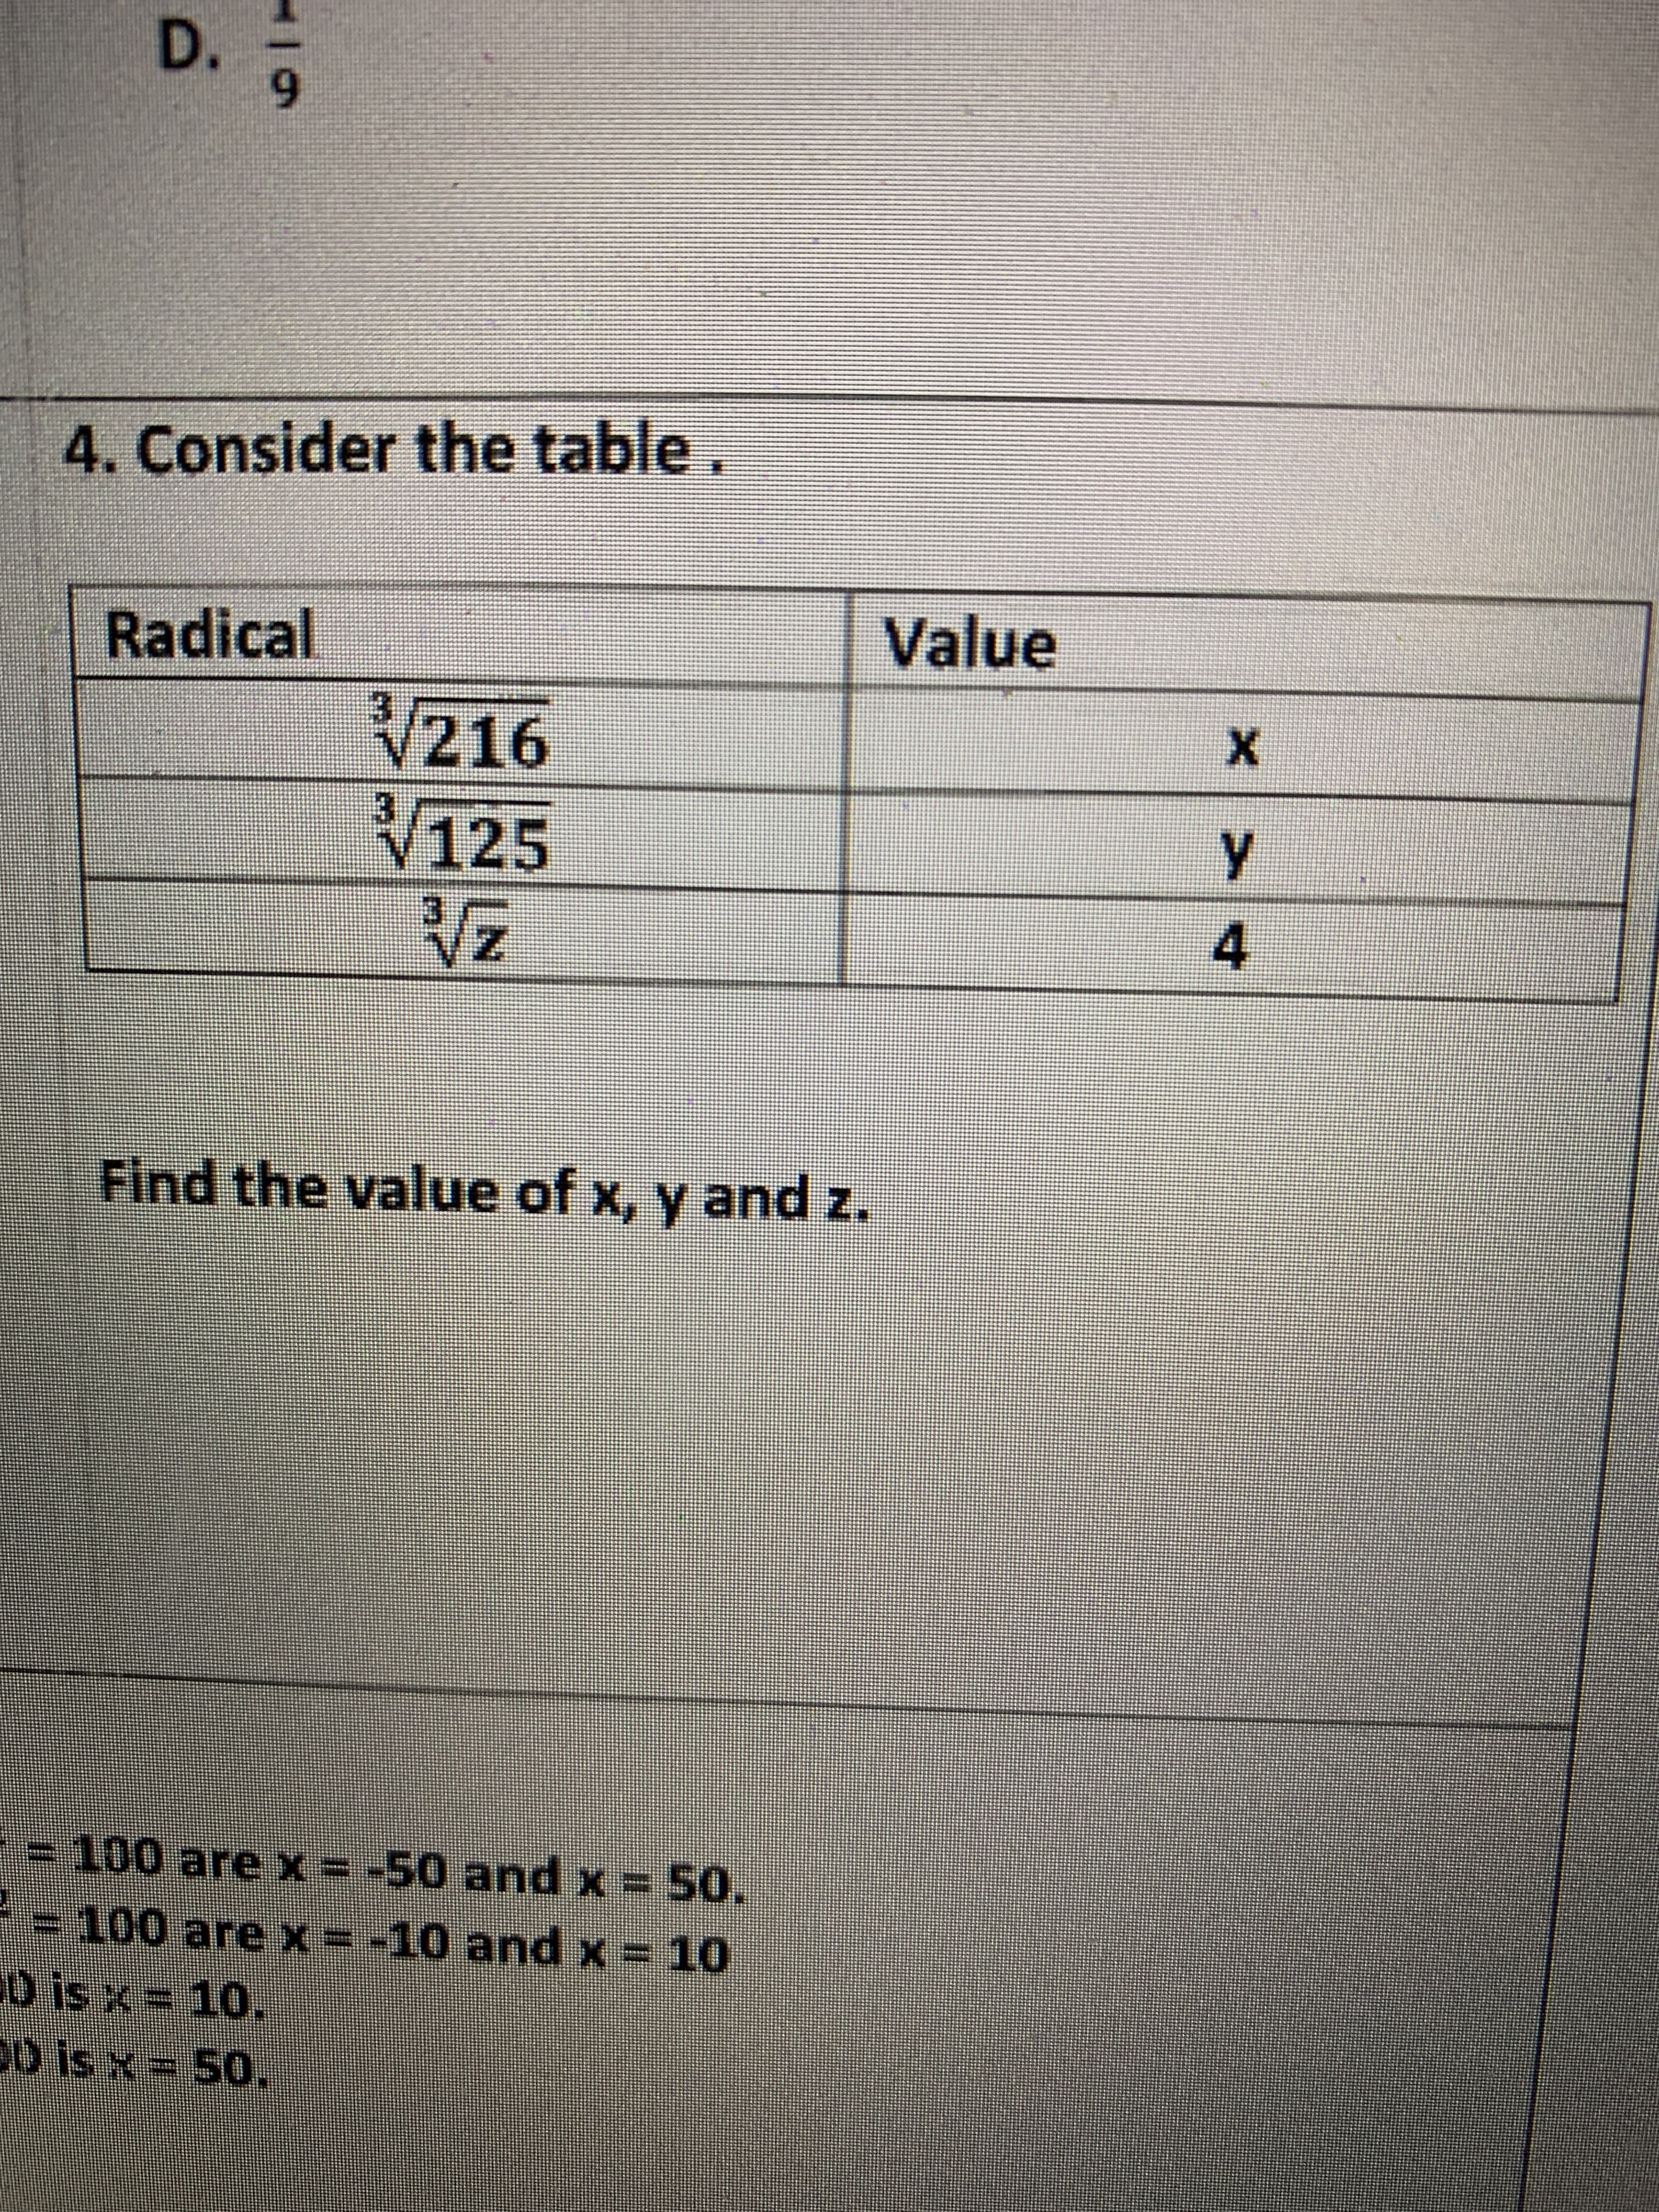 >14
D.
6.
4. Consider the table.
Radical
Value
V216
V125
Find the value of x, y and z.
3D100 are X = -50 and x = 50.
3100 are X = -10 and x = 10
D is x= 10.
DD is x = 50.
